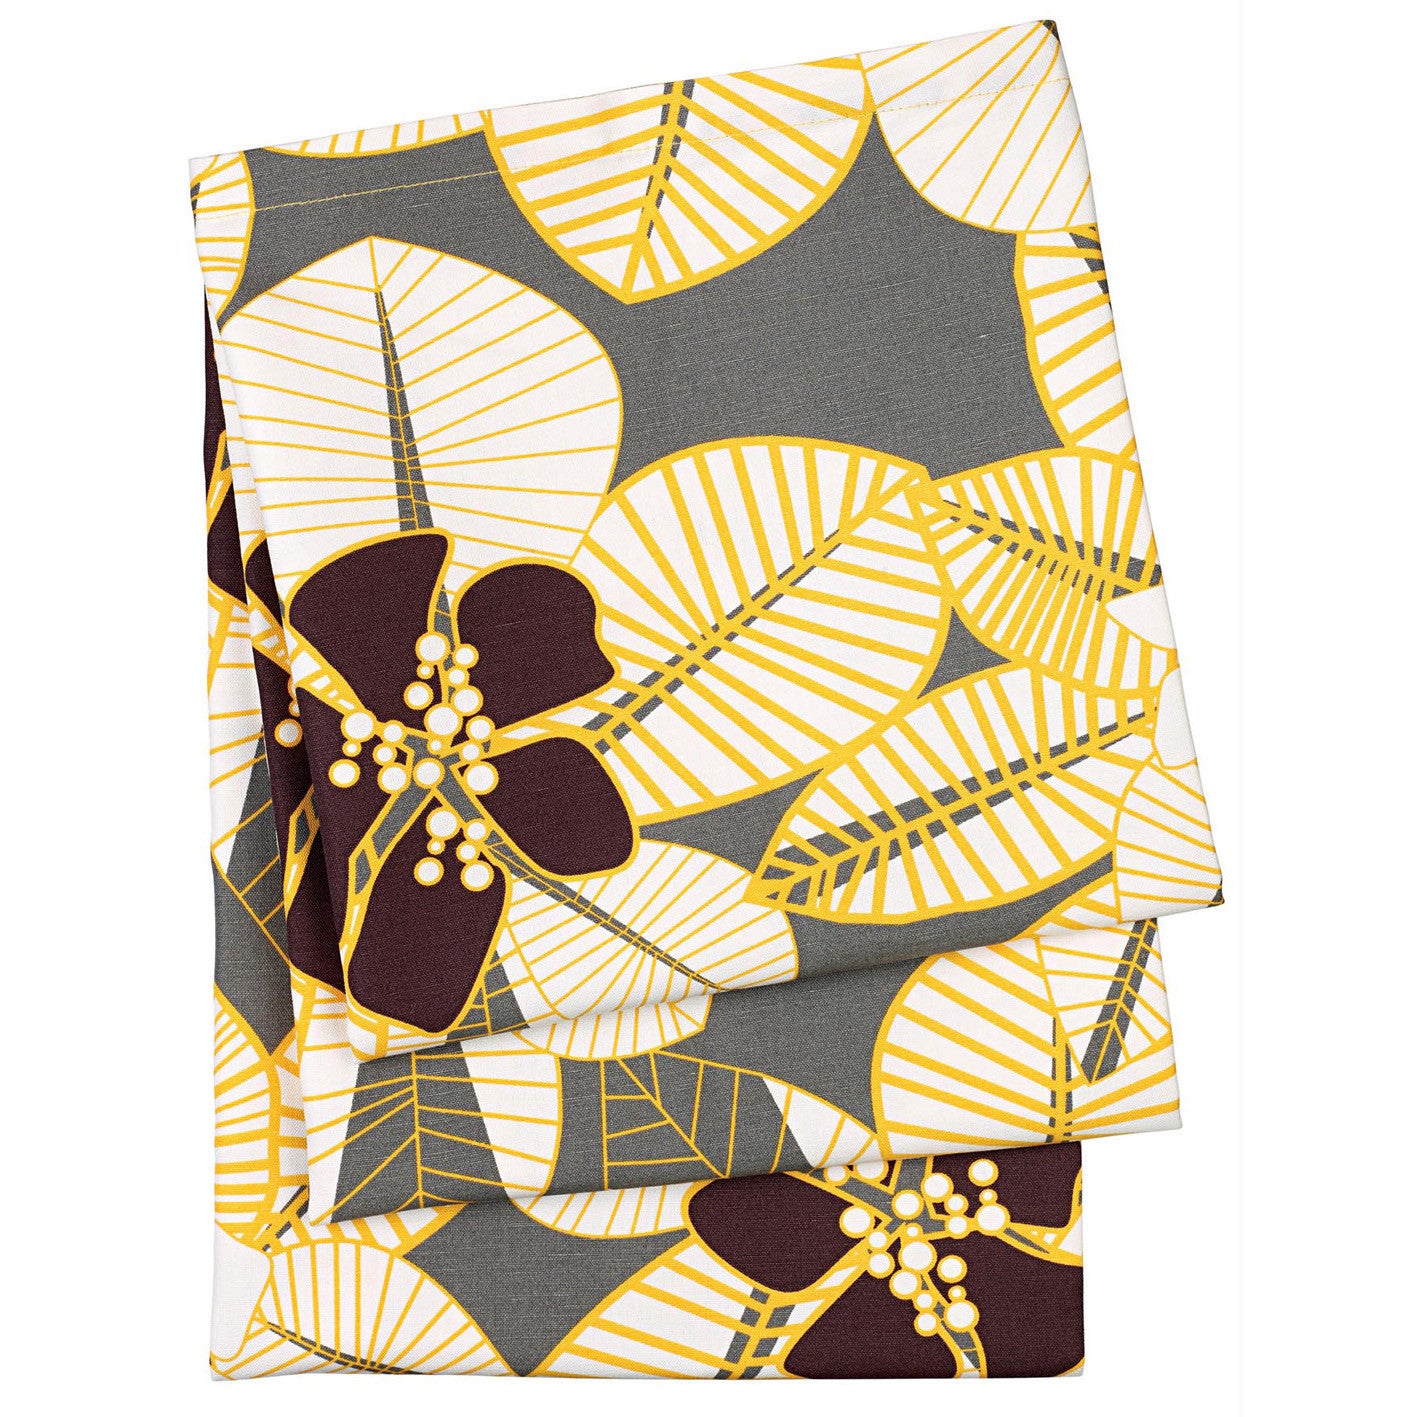 Tiki Tropical Floral Pattern Cotton Linen Tablecloth in Grey, Yellow and Brown Made in Canada